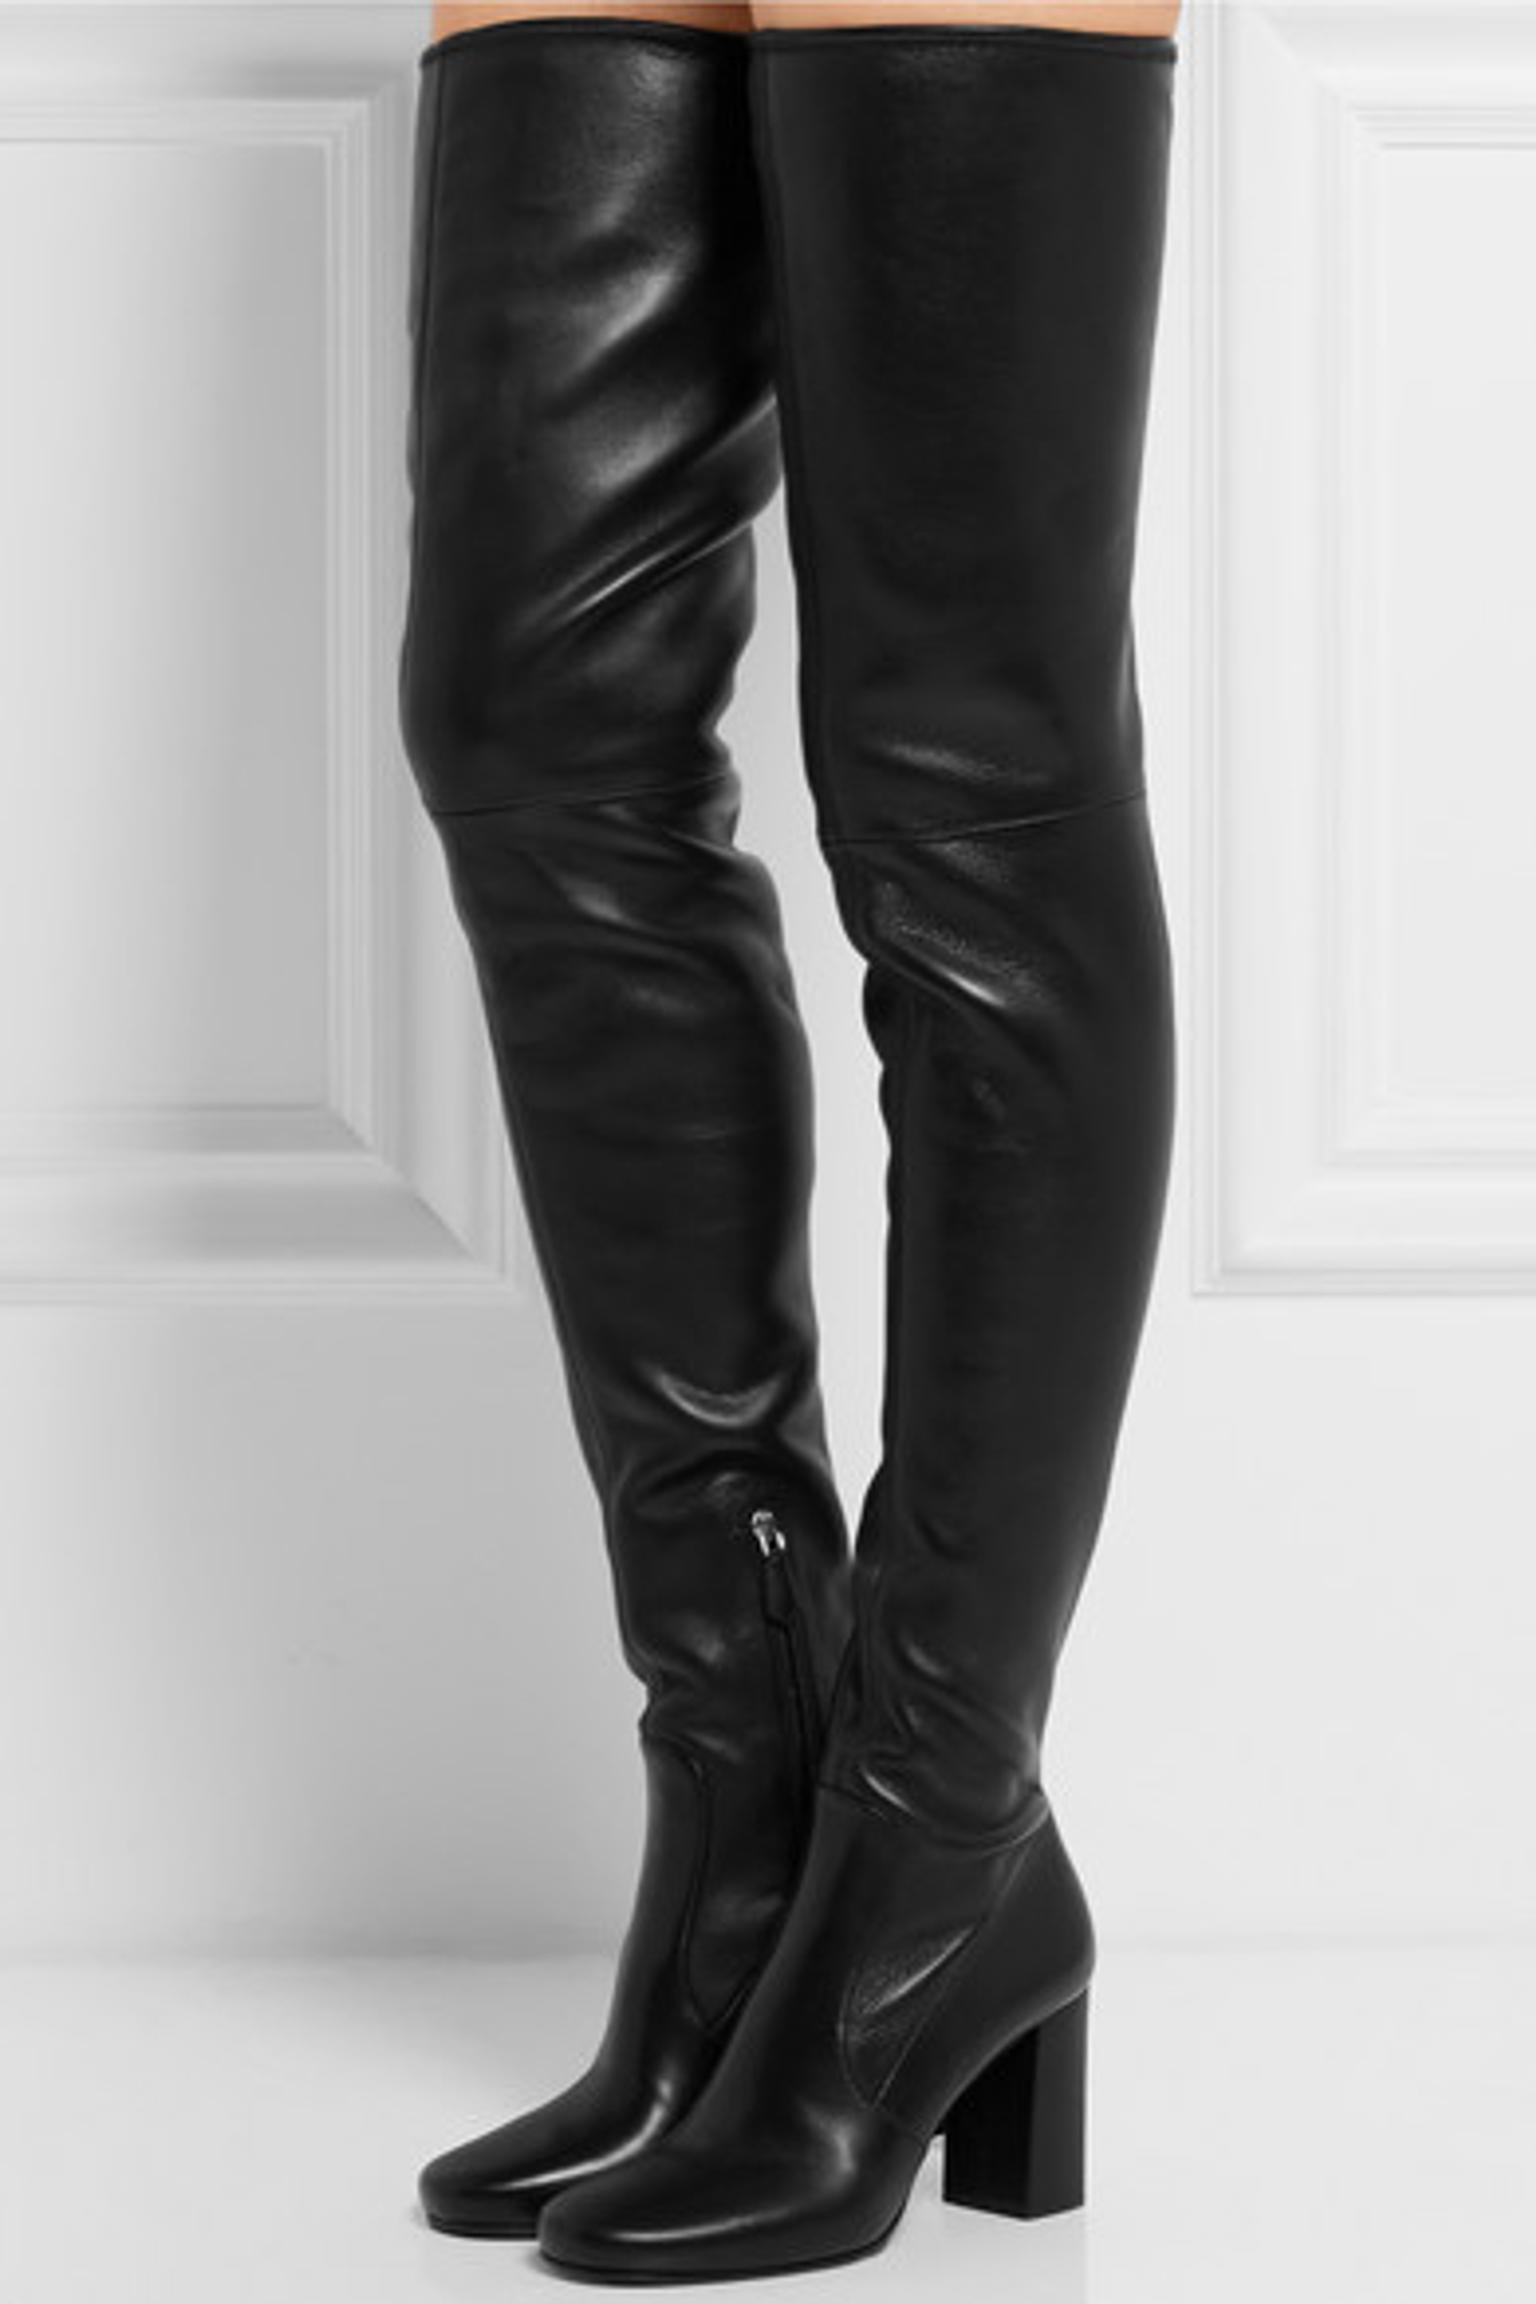 leather thigh boots uk